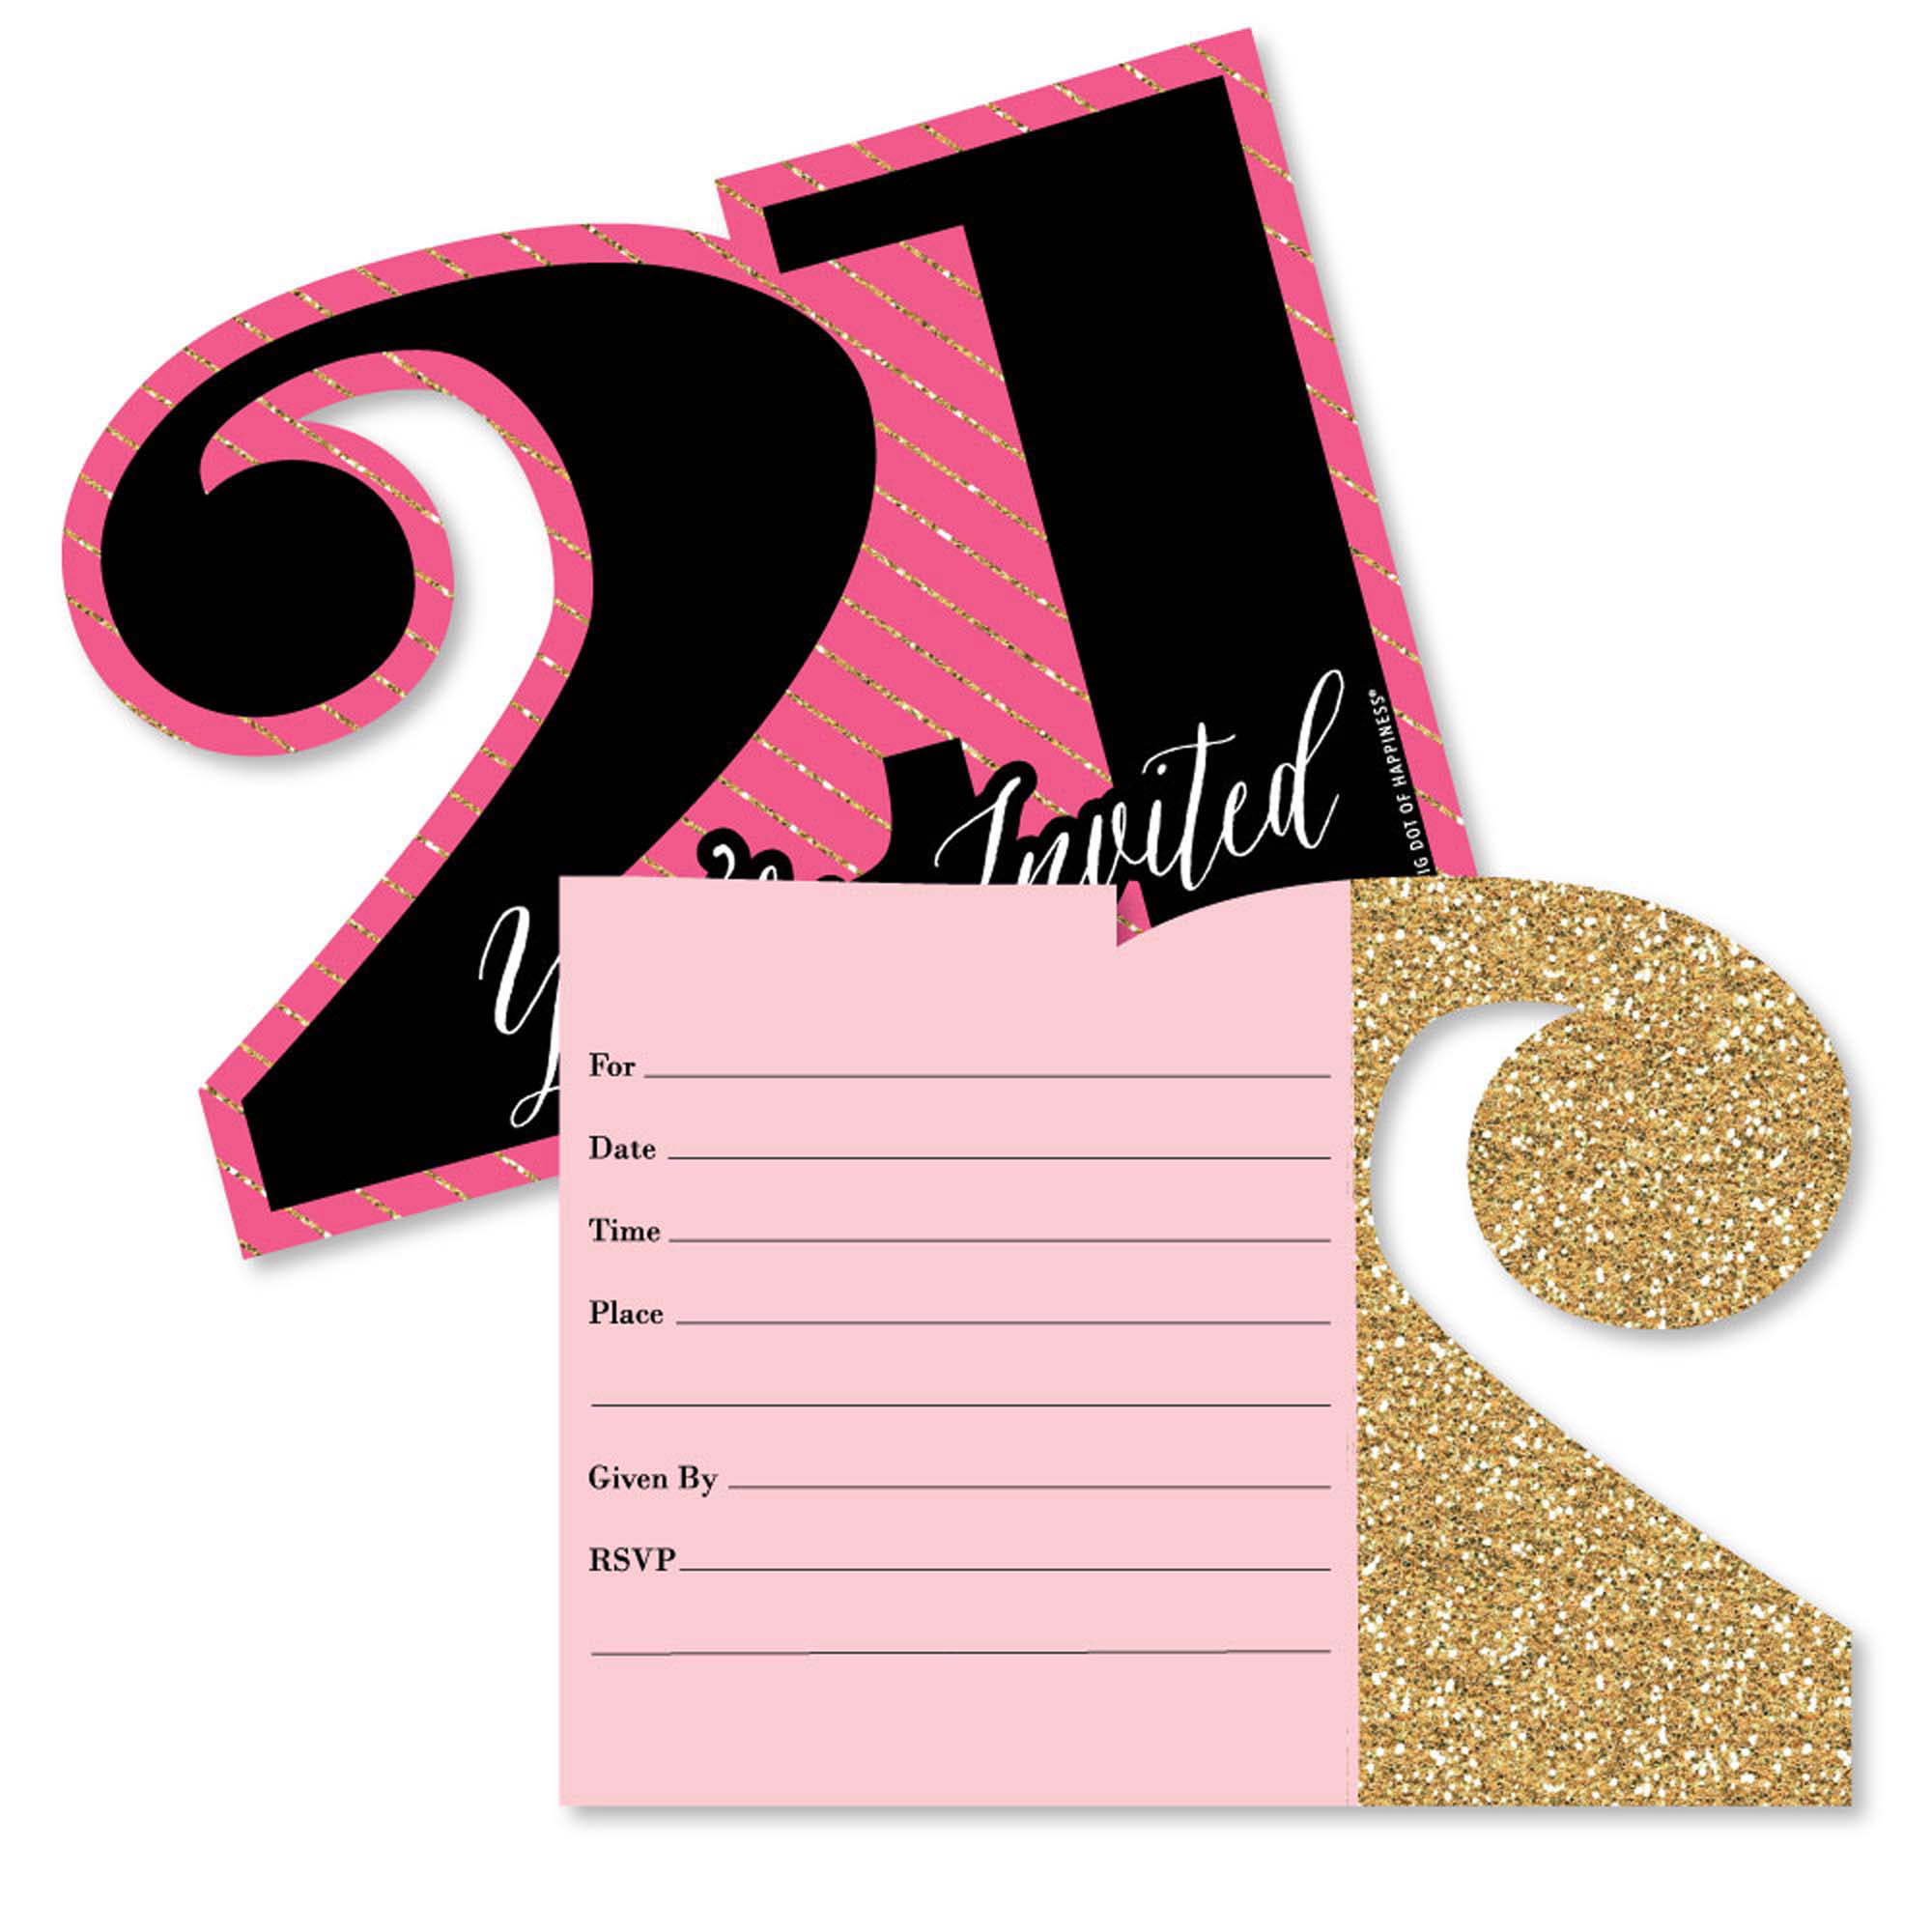 finally-21-girl-shaped-fill-in-invitations-21st-birthday-party